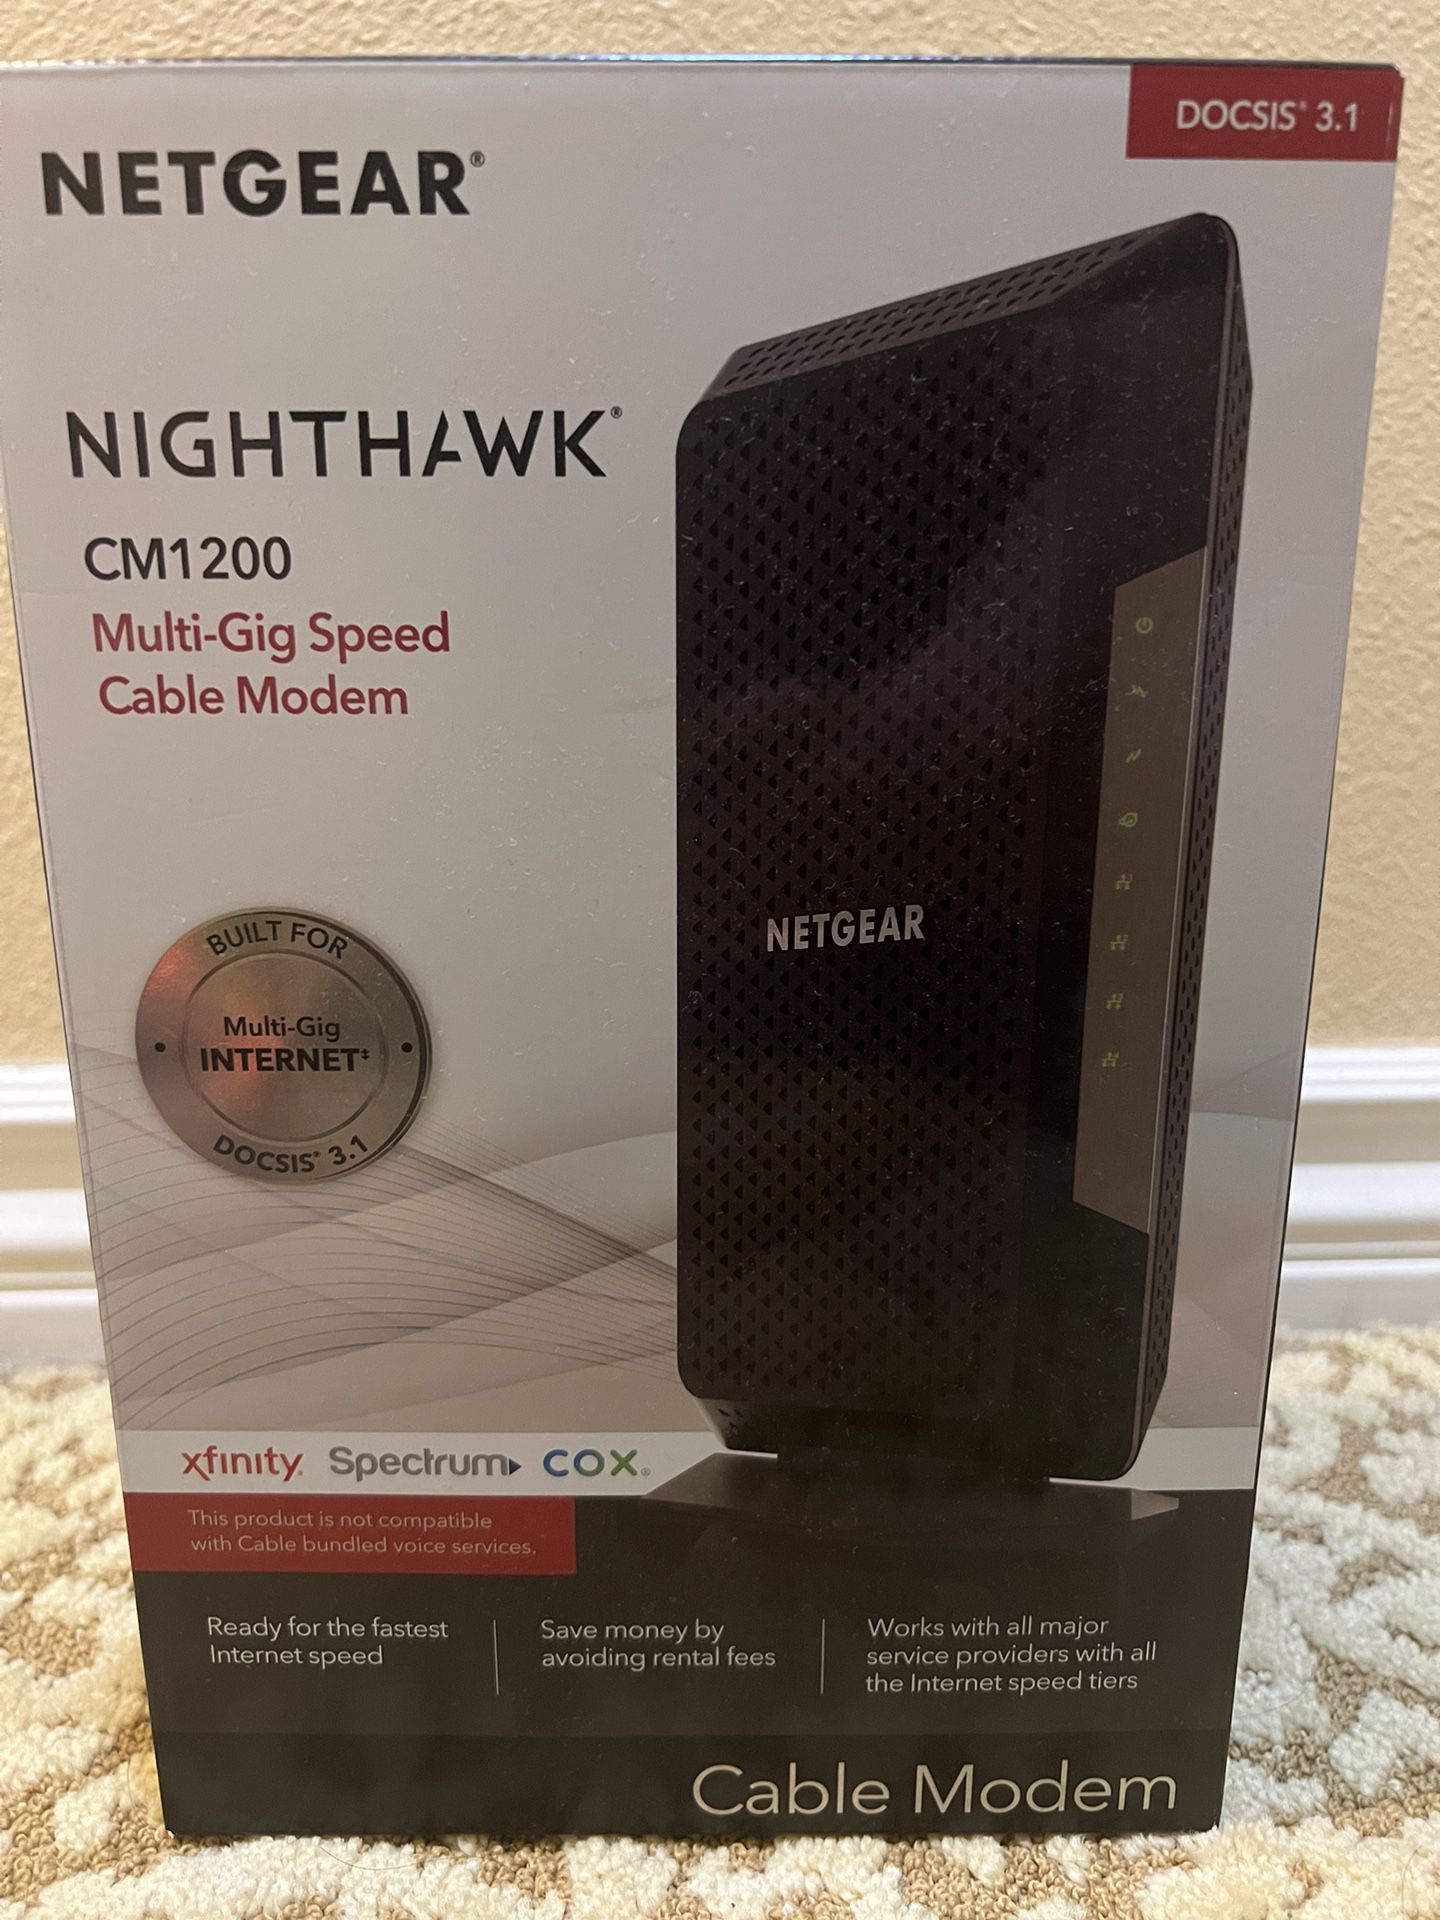 NETGEAR Nighthawk Cable Modem CM1200 - Compatible with all Cable Providers including Xfinity by Comcast, Spectrum, Cox | For Cable Plans Up to 2 Gigab